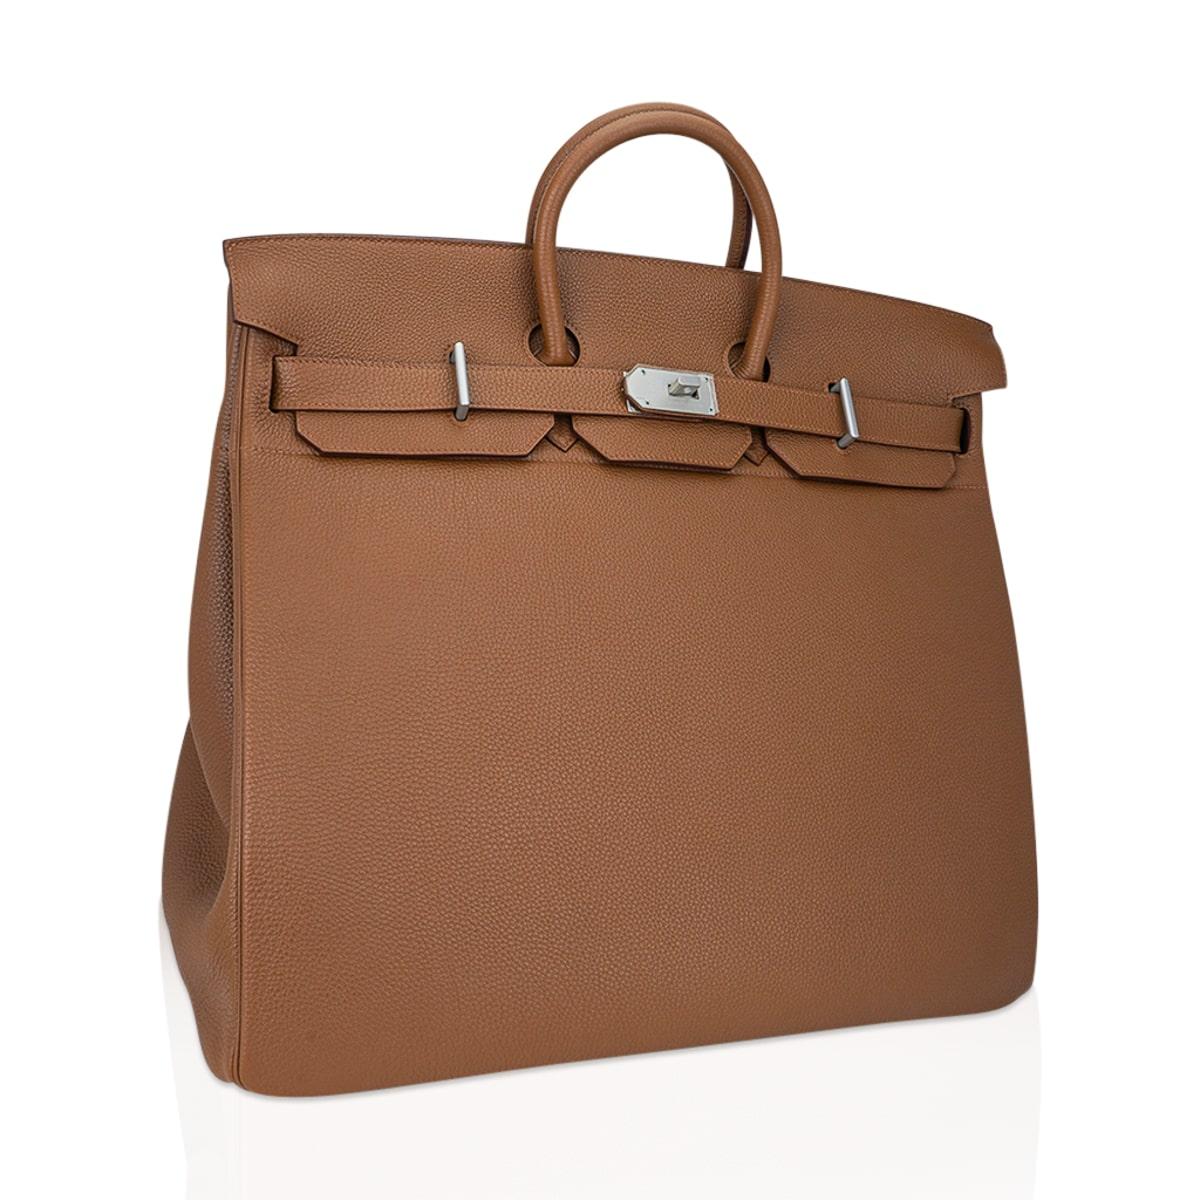 Guaranteed authentic rare Hermes Helium 50 HAC bag (Haut a Courroies) featured in Alezan togo leather.  
Limited edition accentuated with Aluminum hardware.  
Chic and timeless.   
This beautiful travel bag is a true Hermes collectors treasure - and